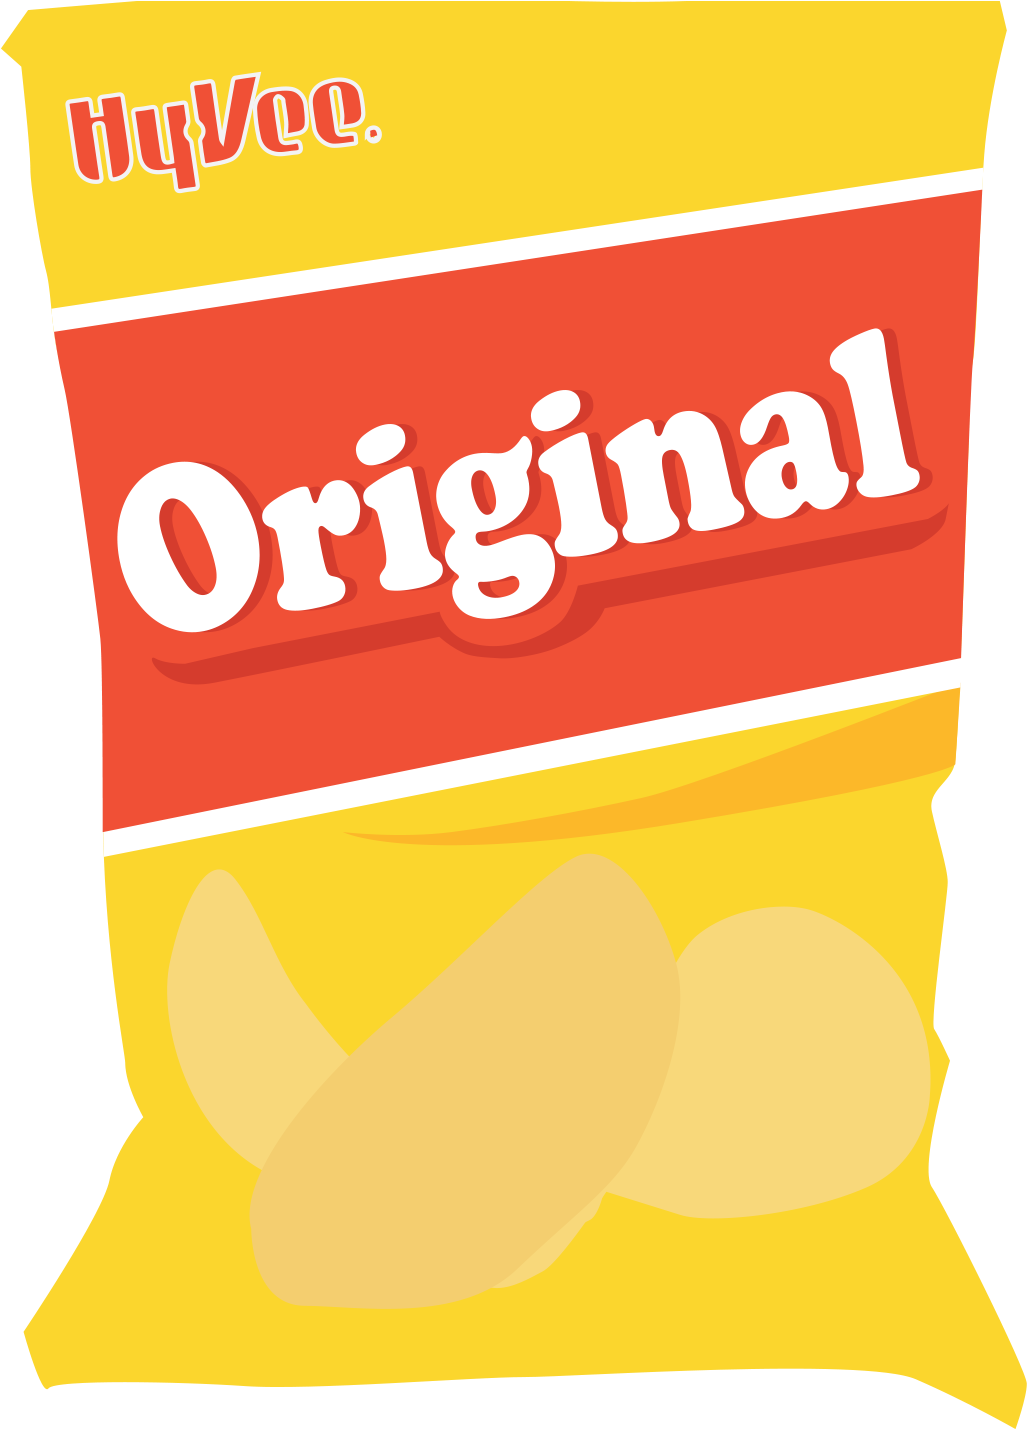 On The Right We Have A Generic Potato Chip Brand And - Bag Of Chips No Brand (1034x1428)